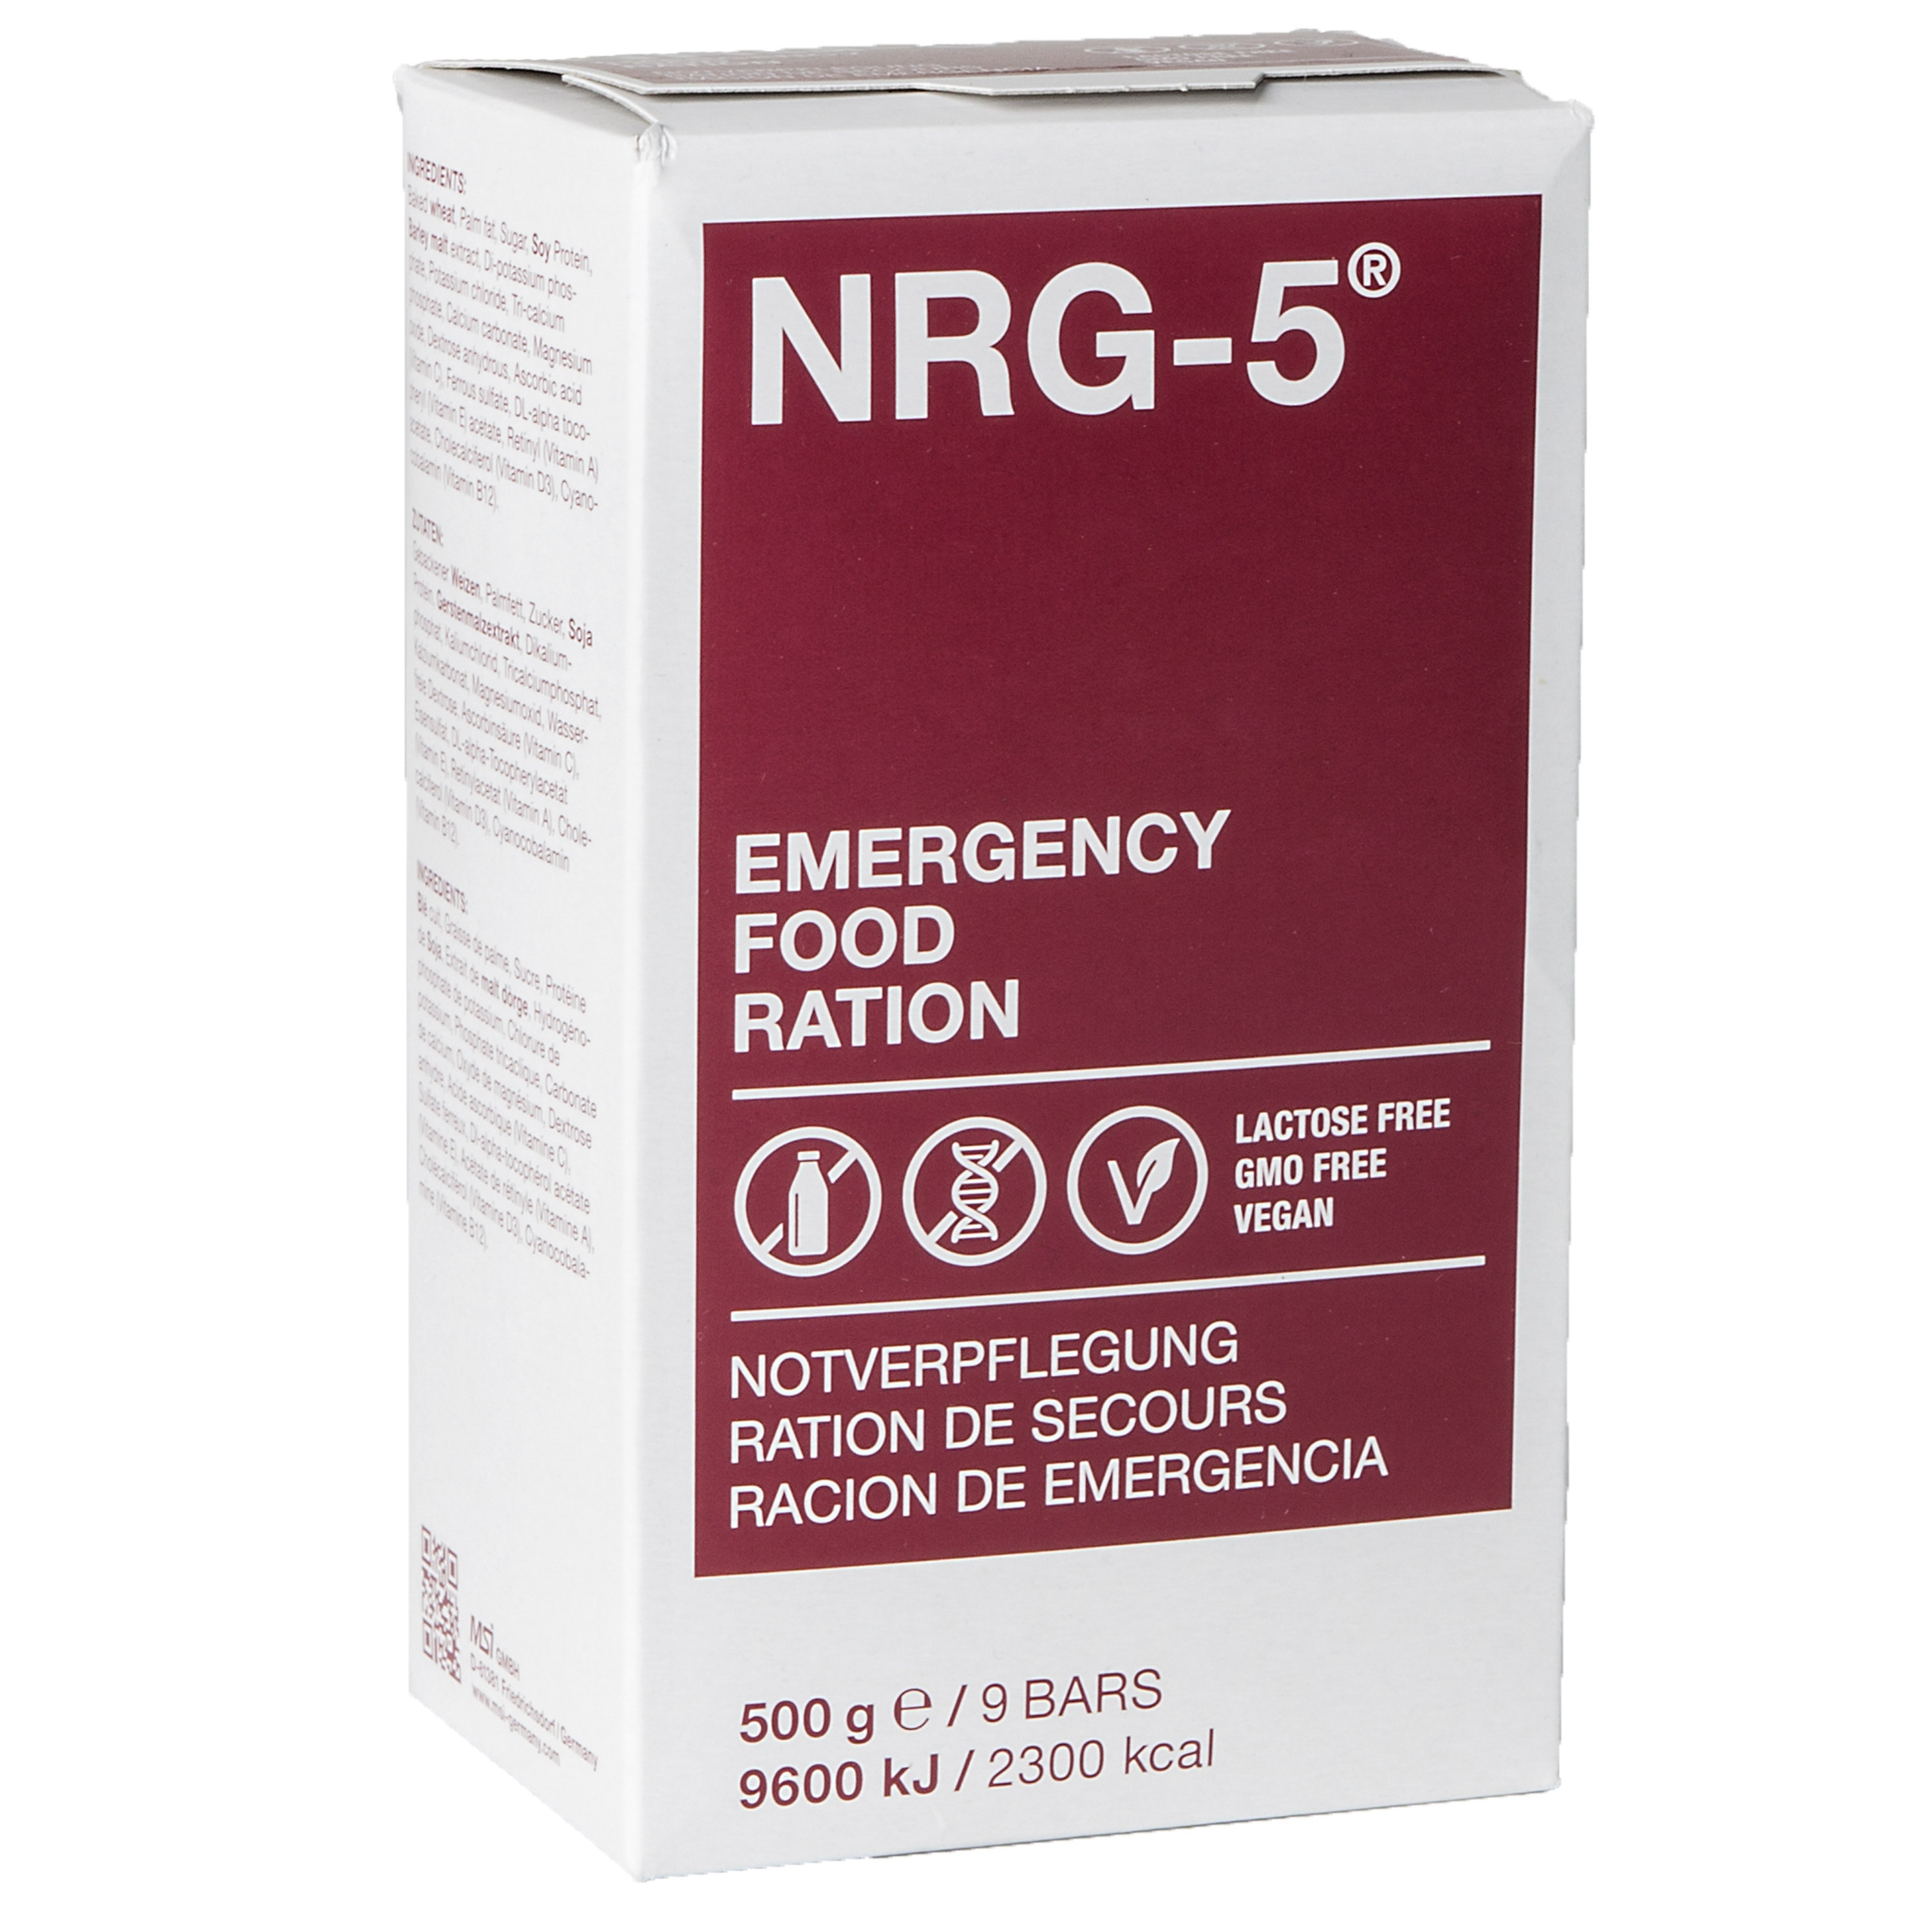 Purchase the Emergency Food Ration NRG-5 by ASMC